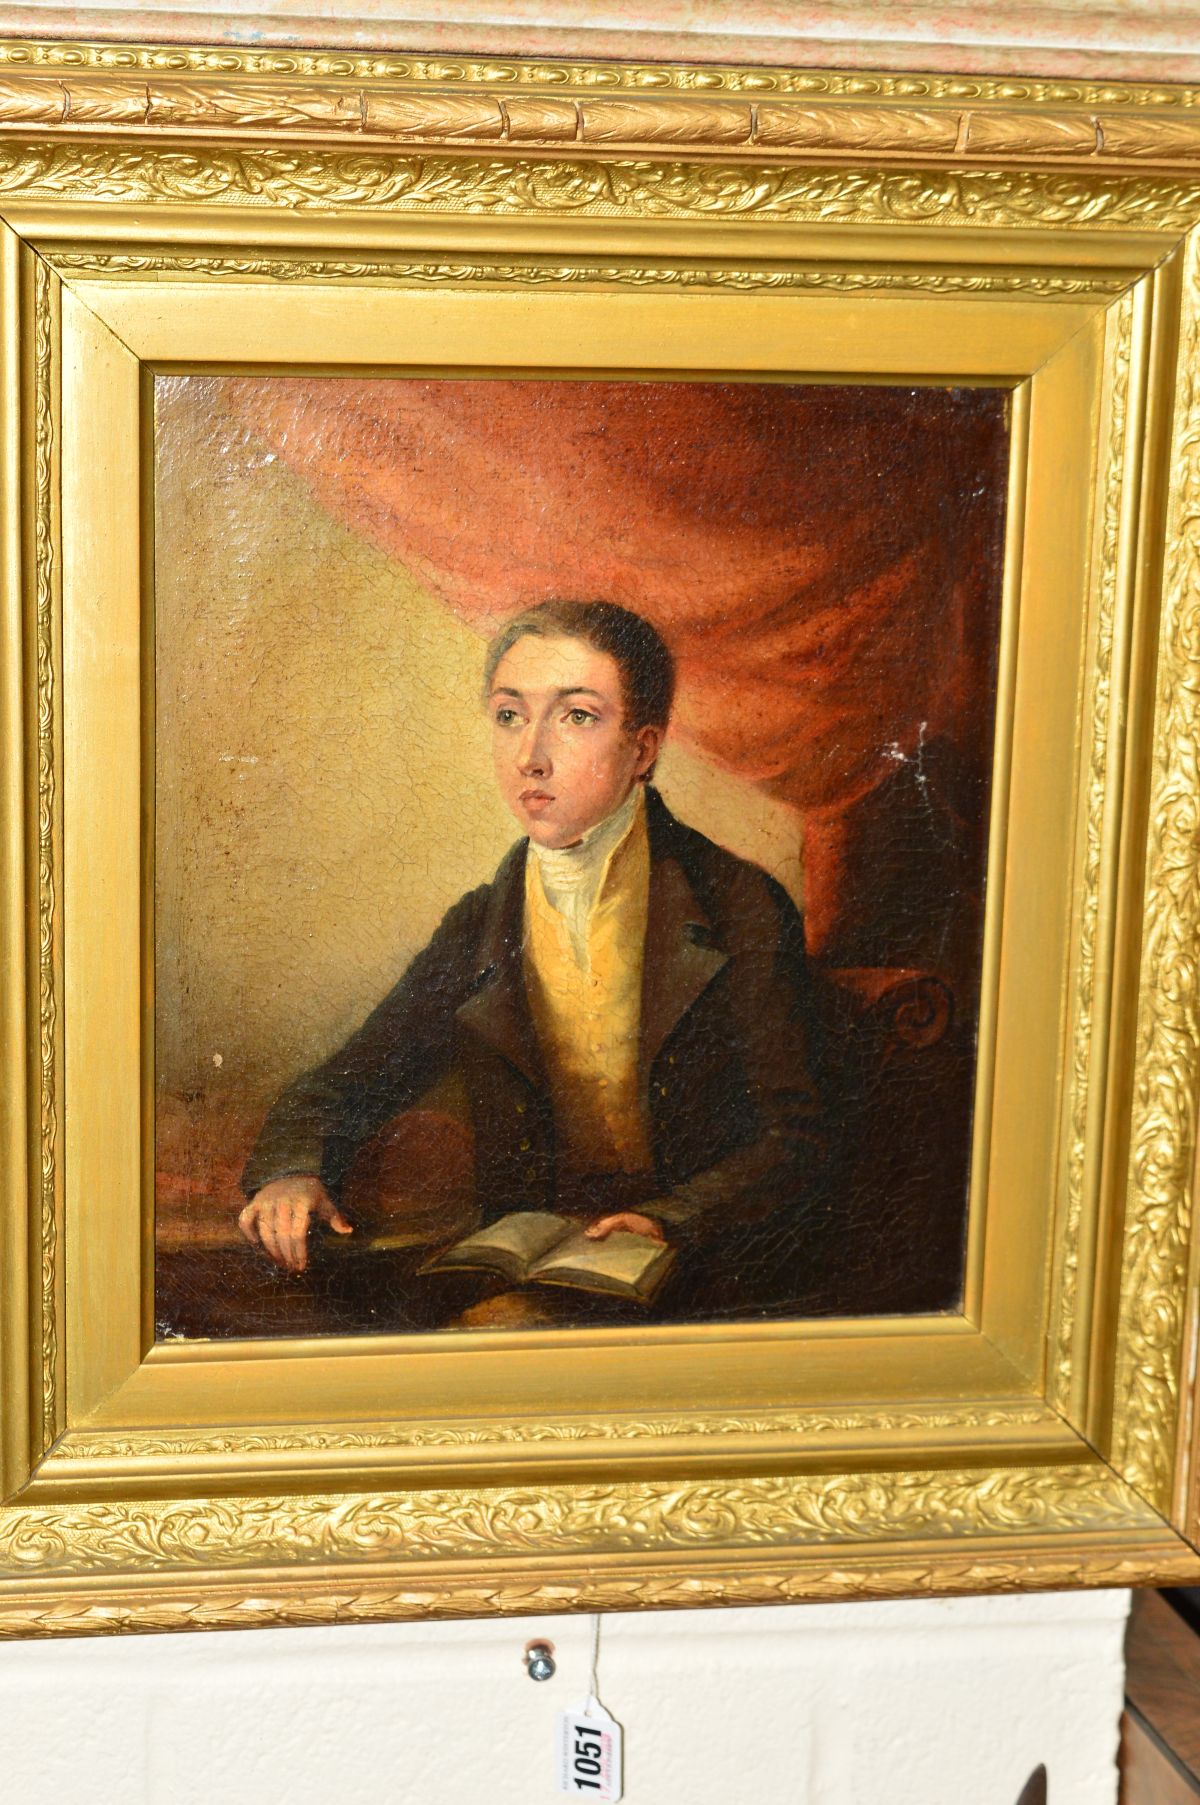 T (?) BALLARD (BRITISH, EARLY 19TH CENTURY), Half length portrait of a young man seated at a table